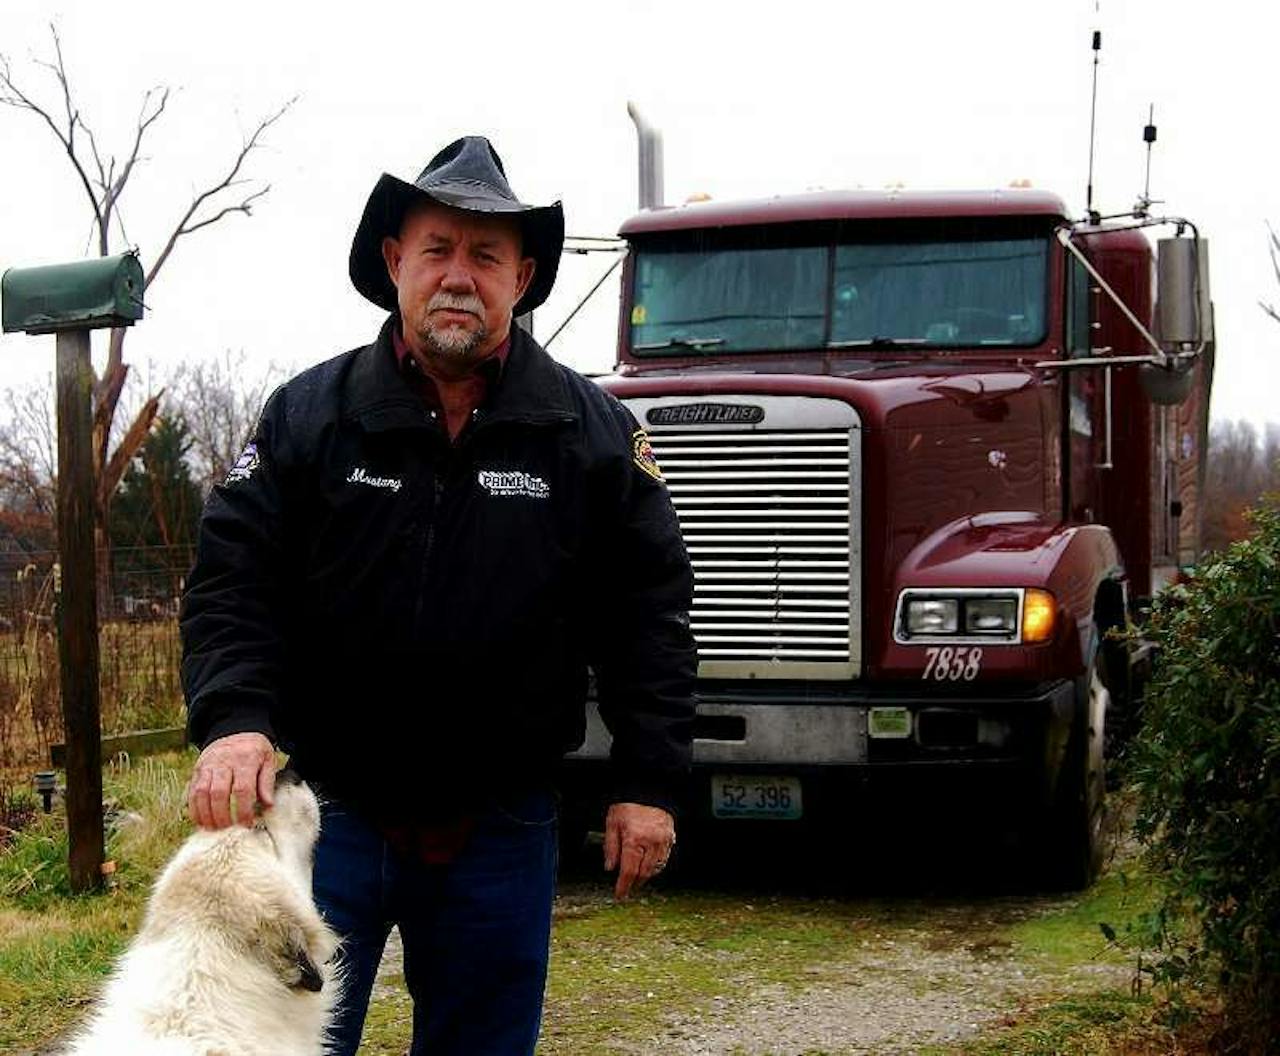 Mike 'Mustang' Crawford pictured in 2009 at his home in Long Lane, Missouri, with the 1994 Freightliner, then with (only) 2 million miles of its eventual 4 behind it.